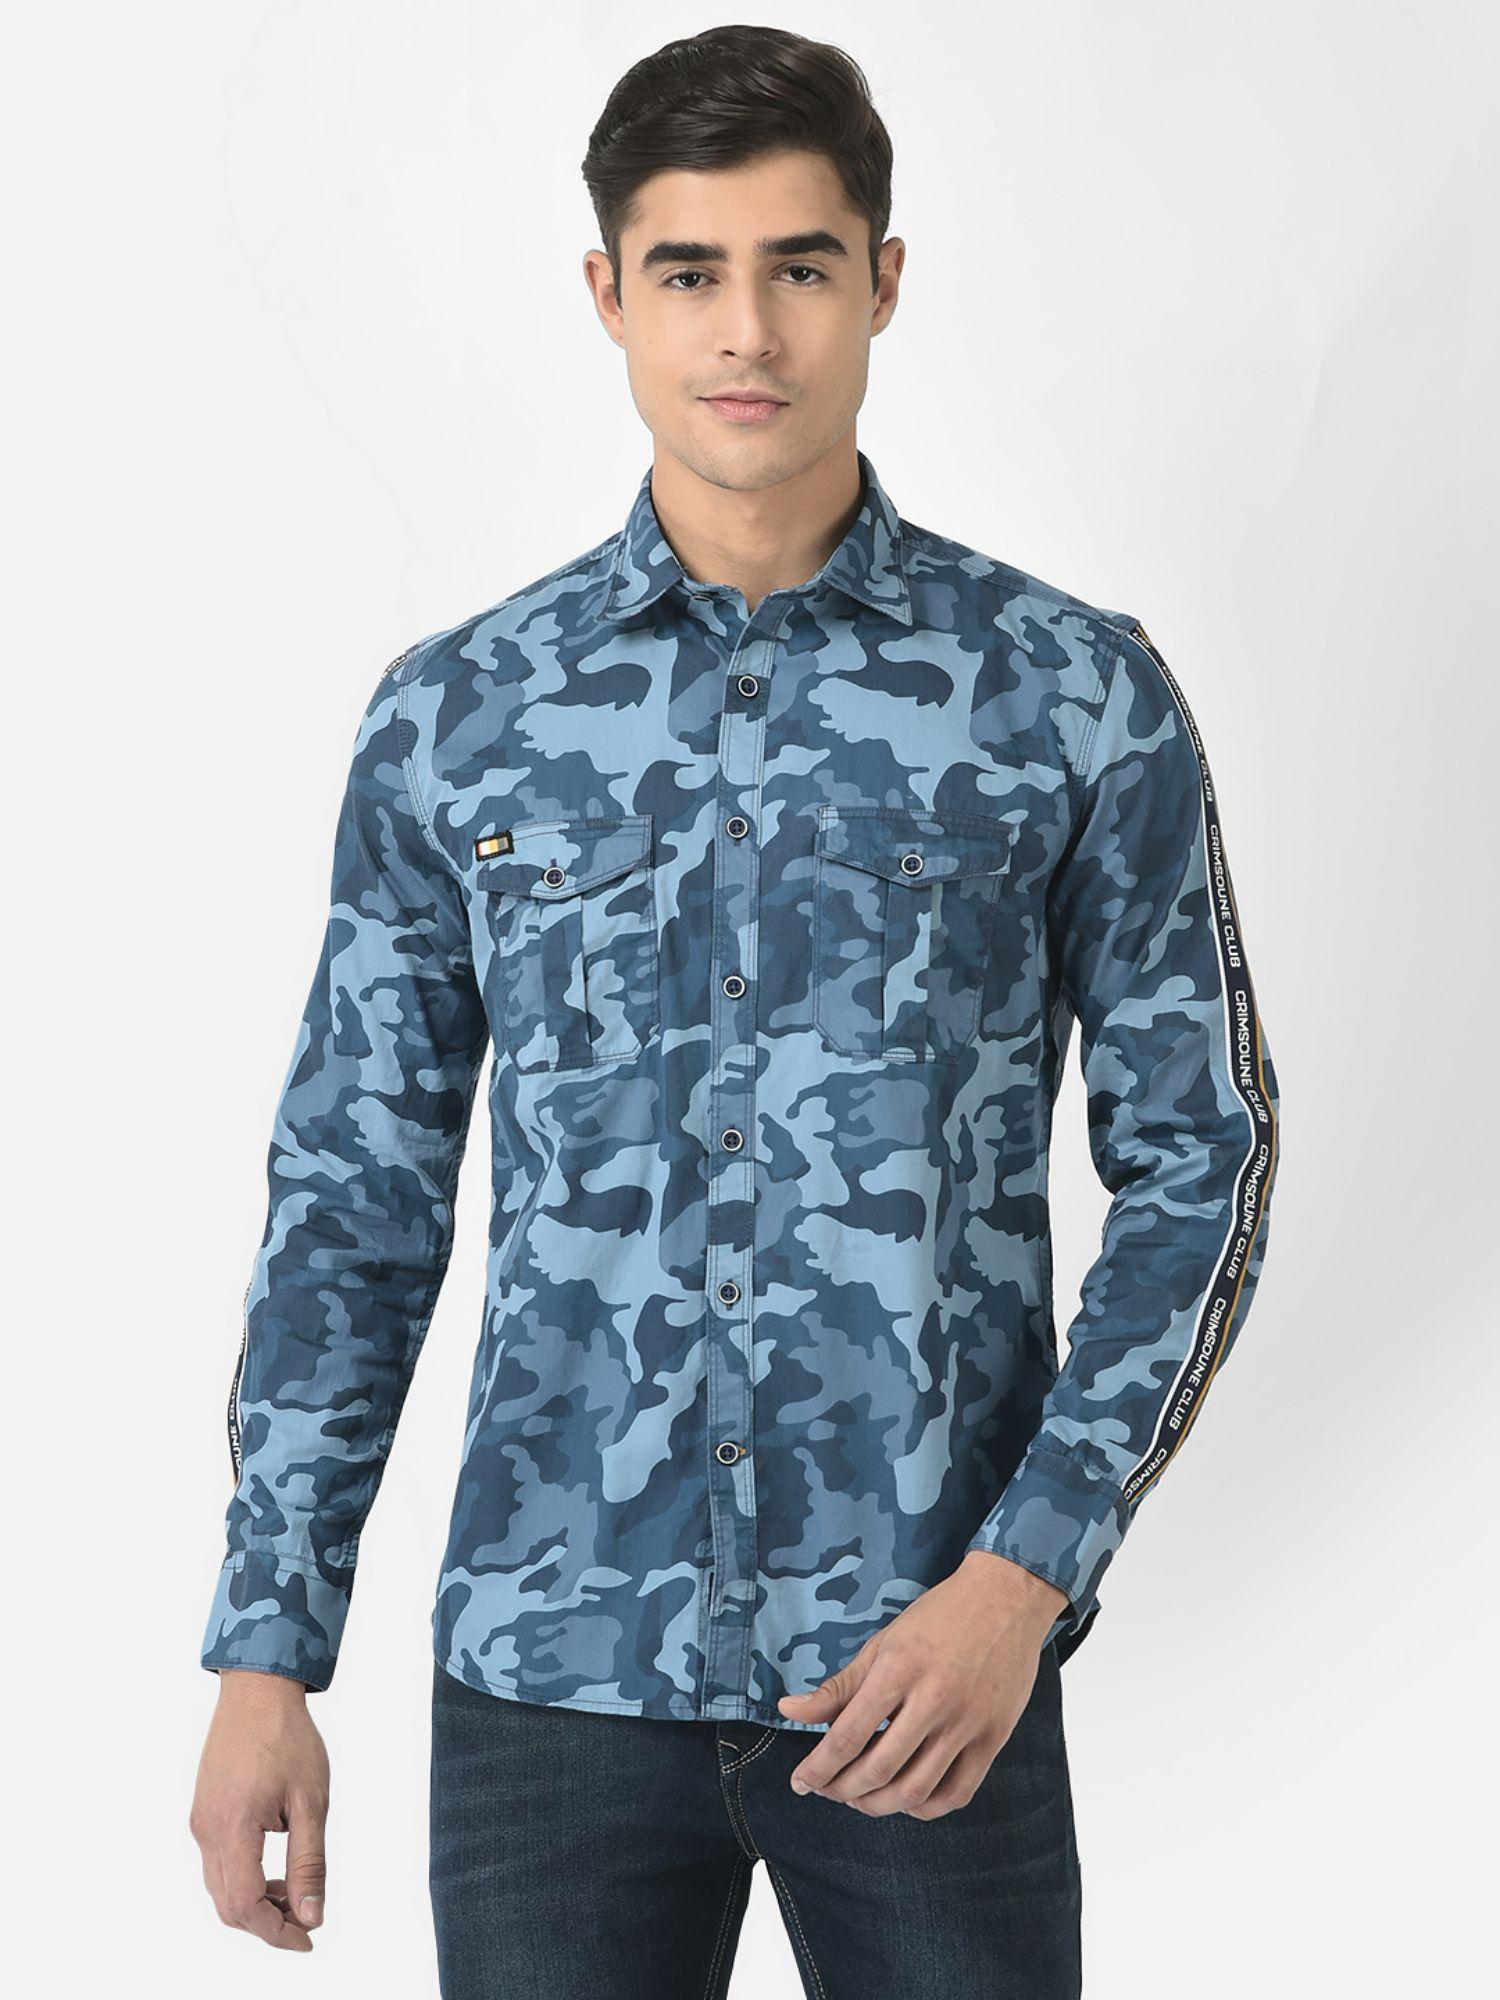 men shirt in blue camouflage print